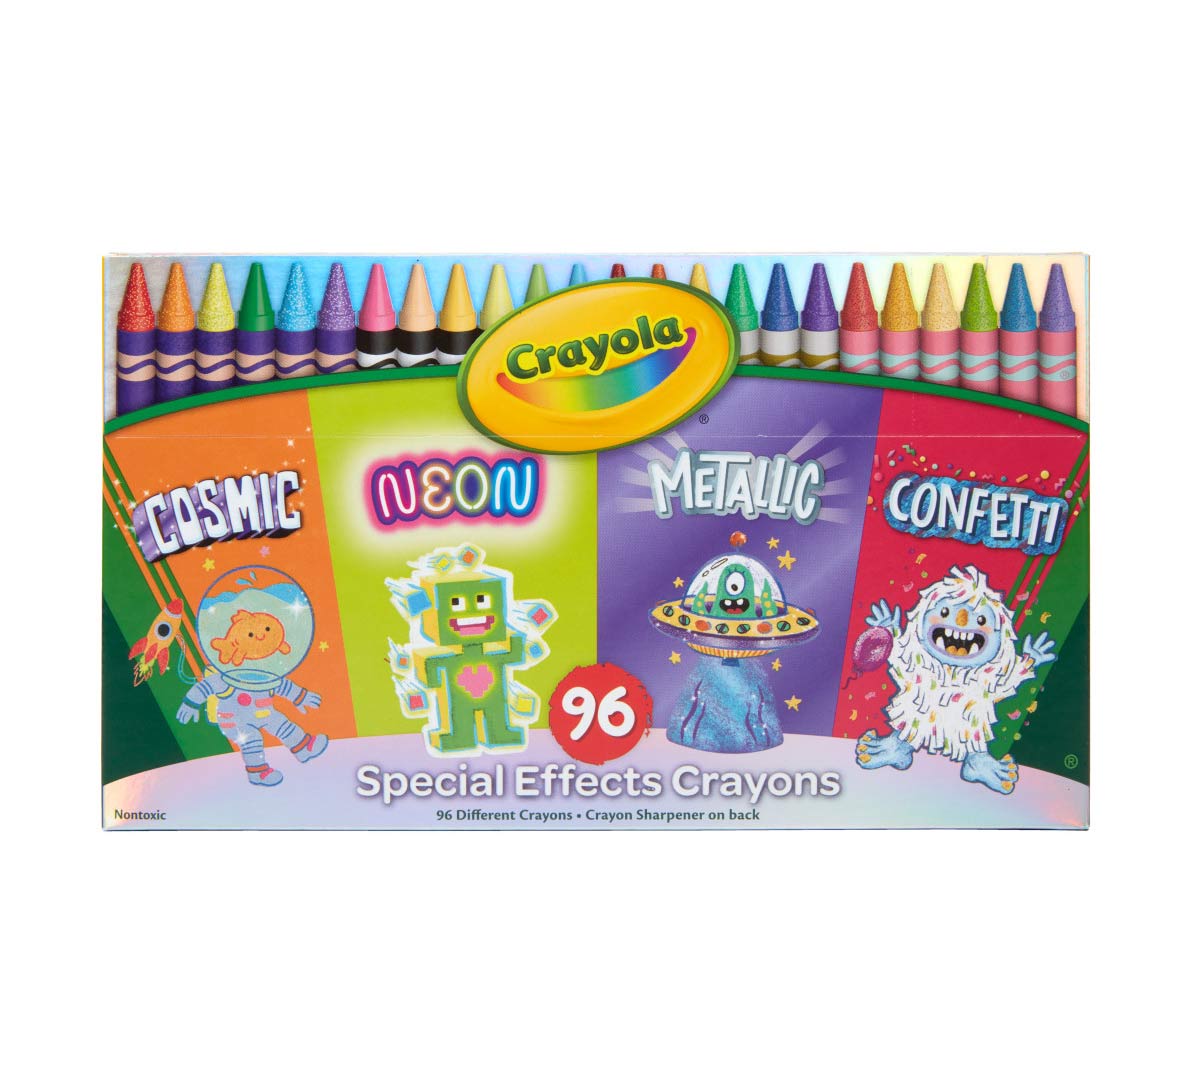 Knowledge Tree  Crayola Binney + Smith Crayola Cosmic Crayons, Pearl &  Glitter Colors, 24ct Crayons, Gift for Kids, Ages 4 & up